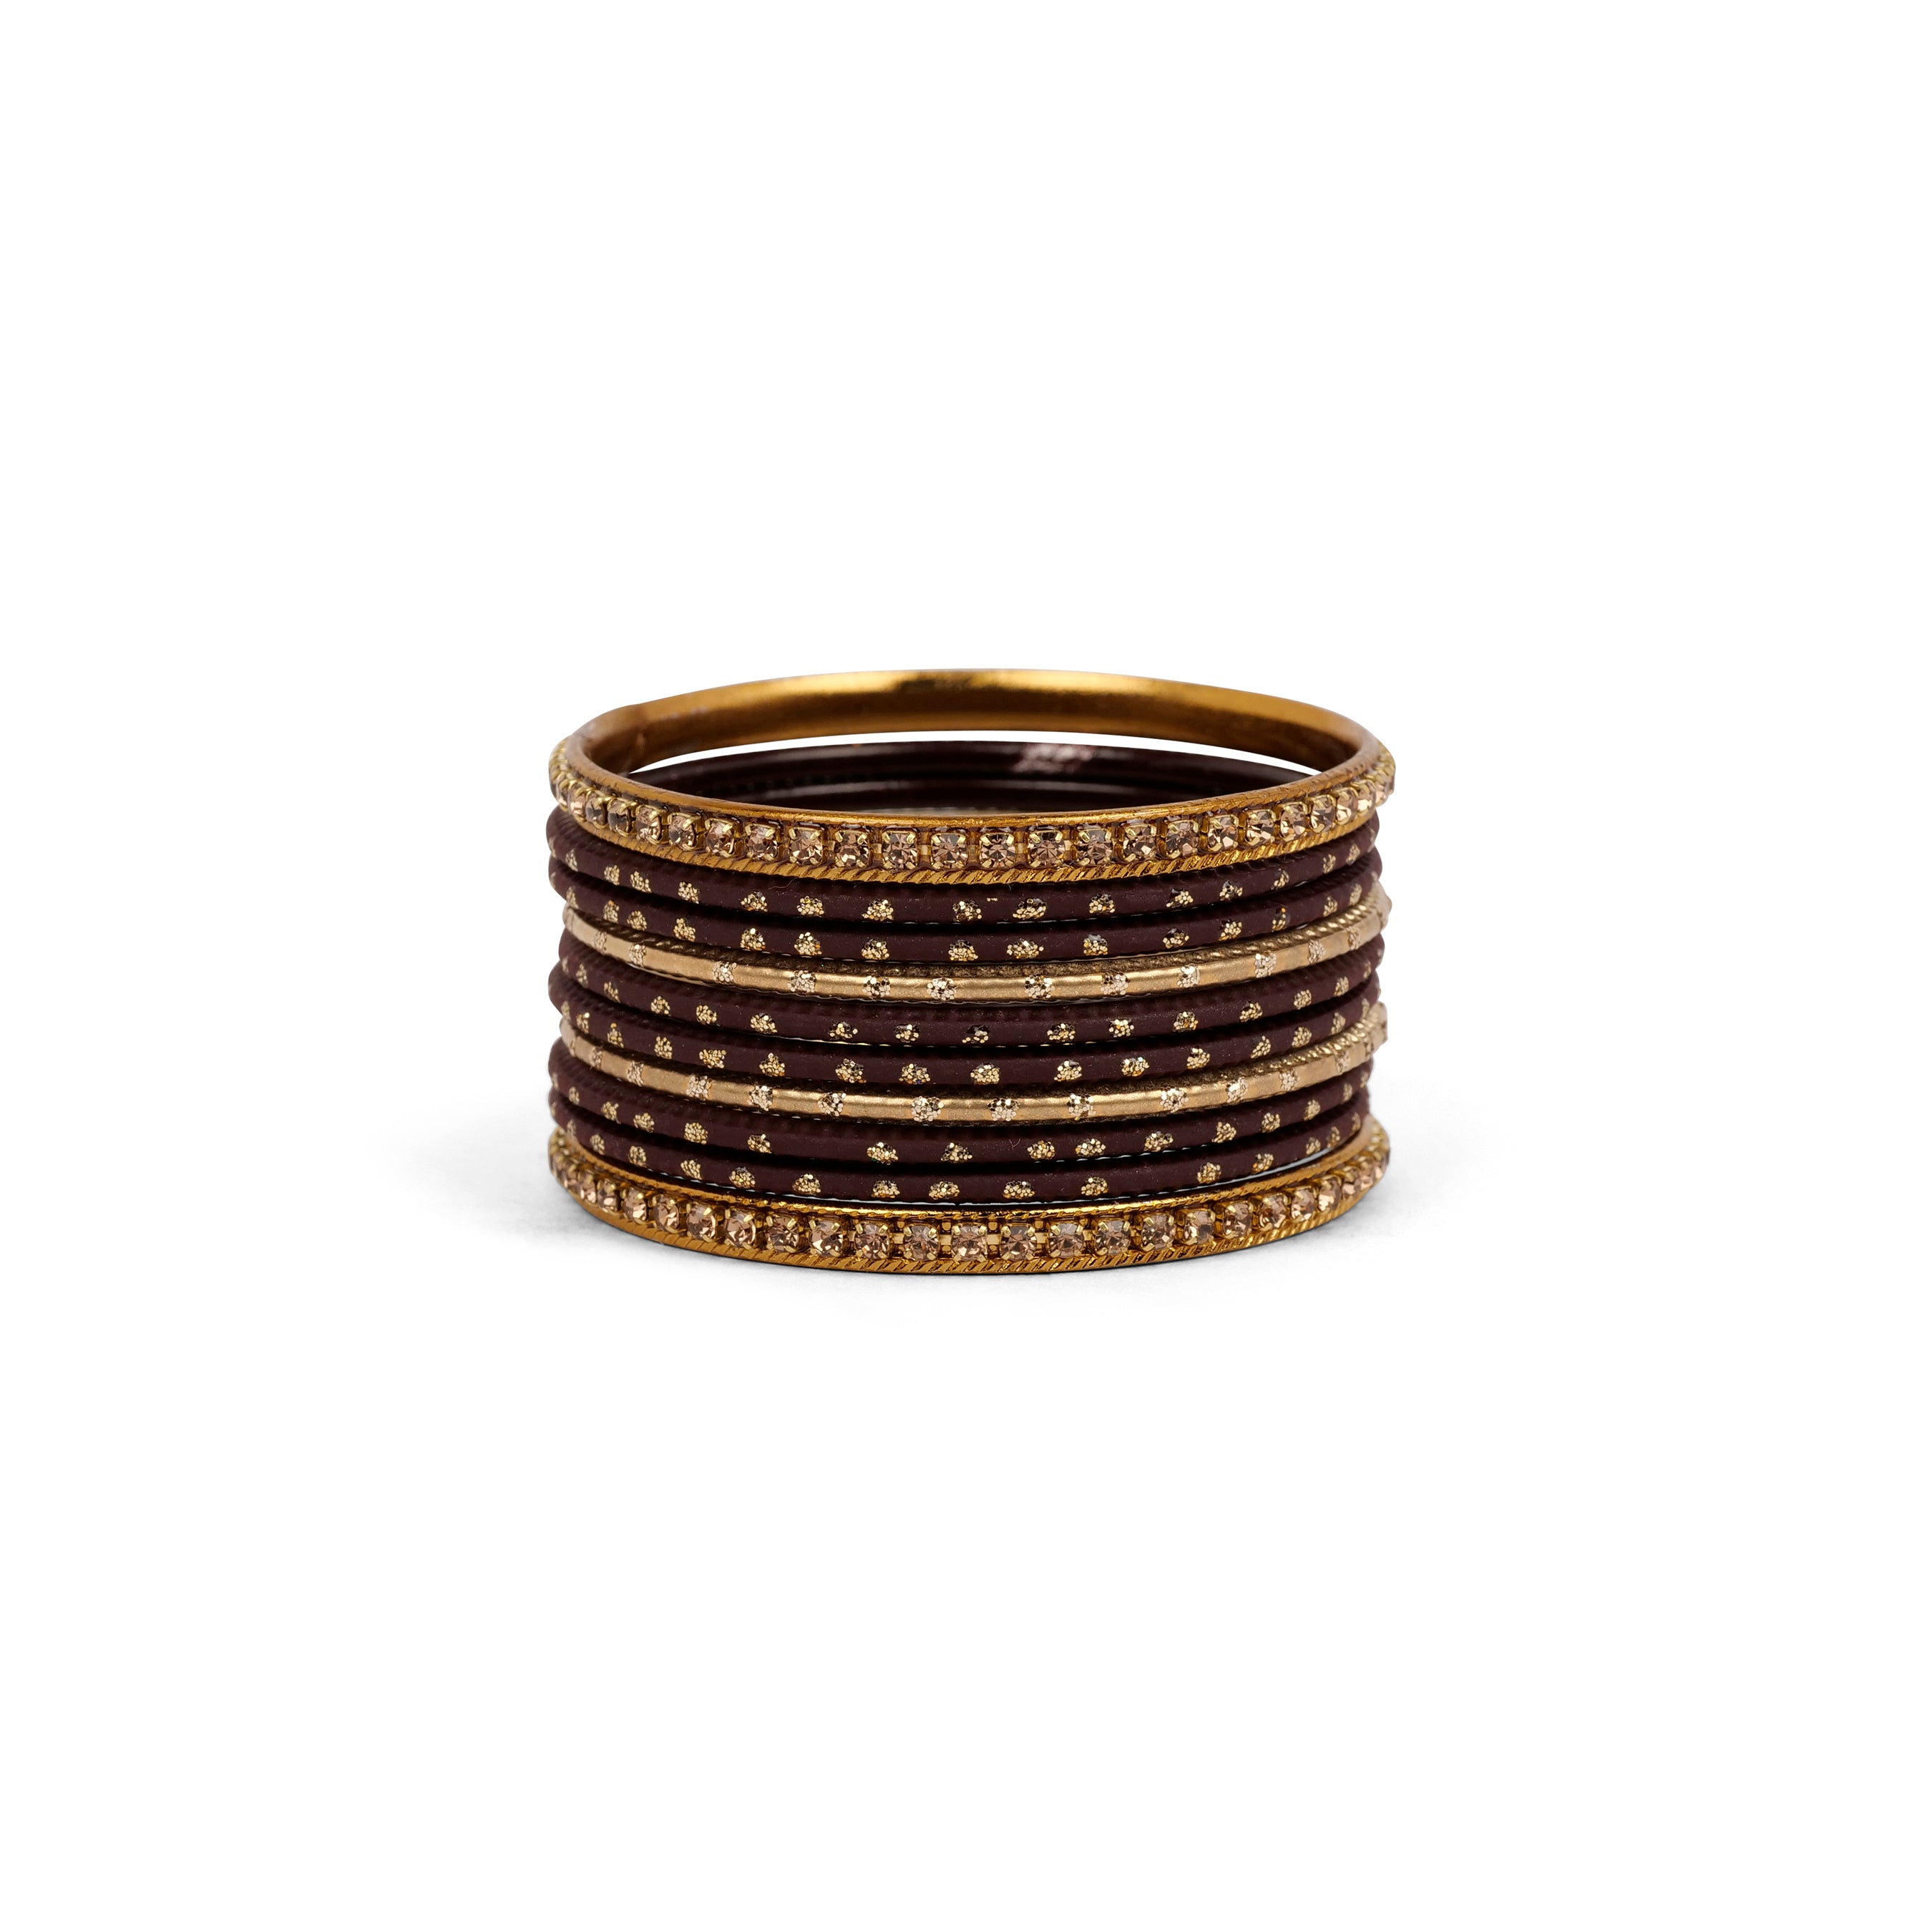 Children's Bangle Set in Maroon and Antique Gold